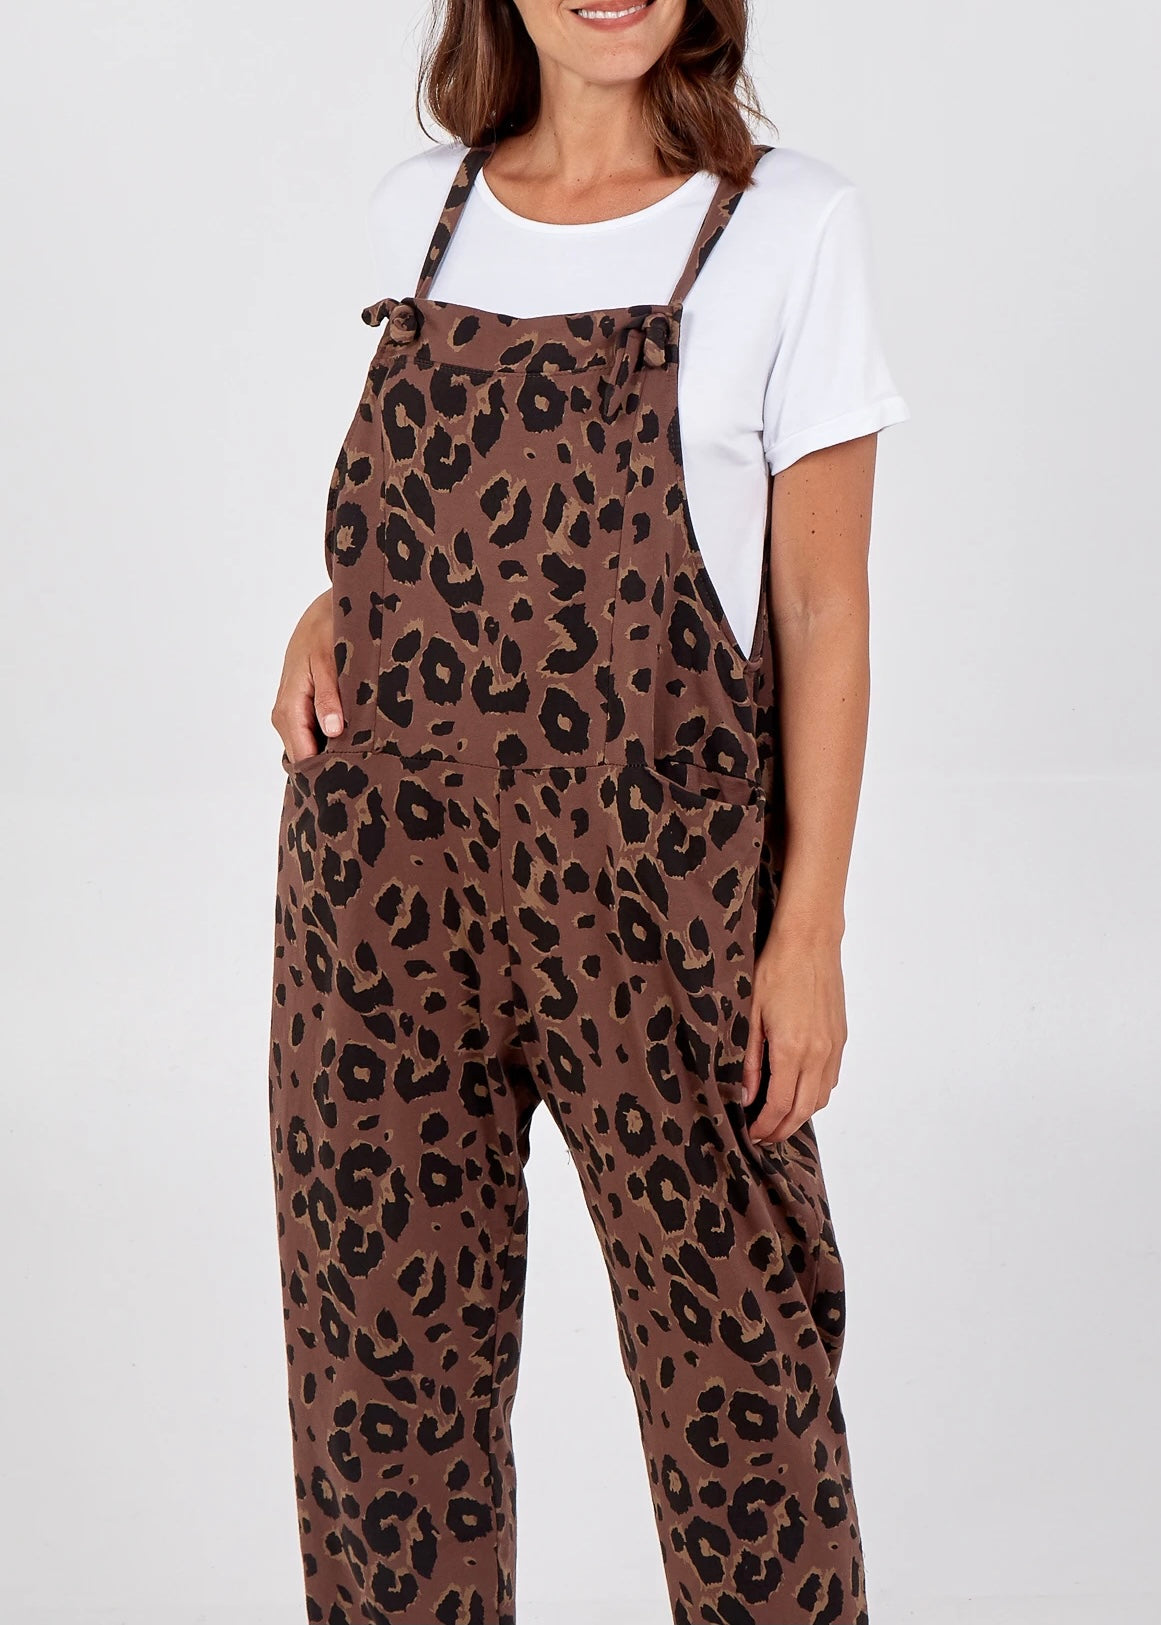 Porthleven Dungarees with pockets in brown with leopard print pattern and tie up straps